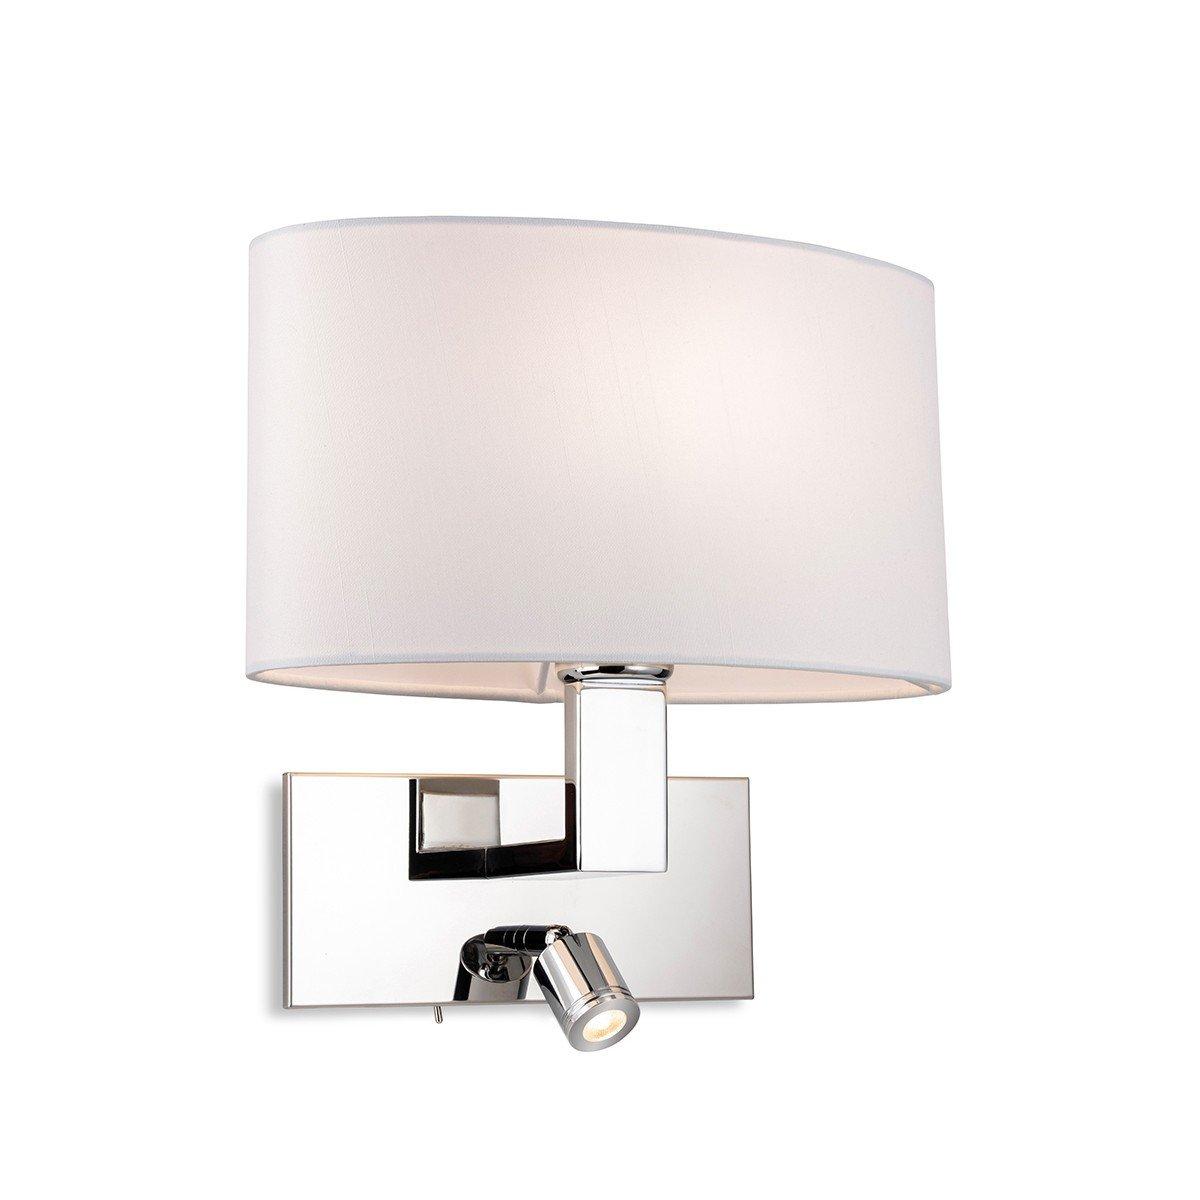 Webster Wall Lamp with Adjustable Switched Reading Light Chrome with Oval Cream Shade